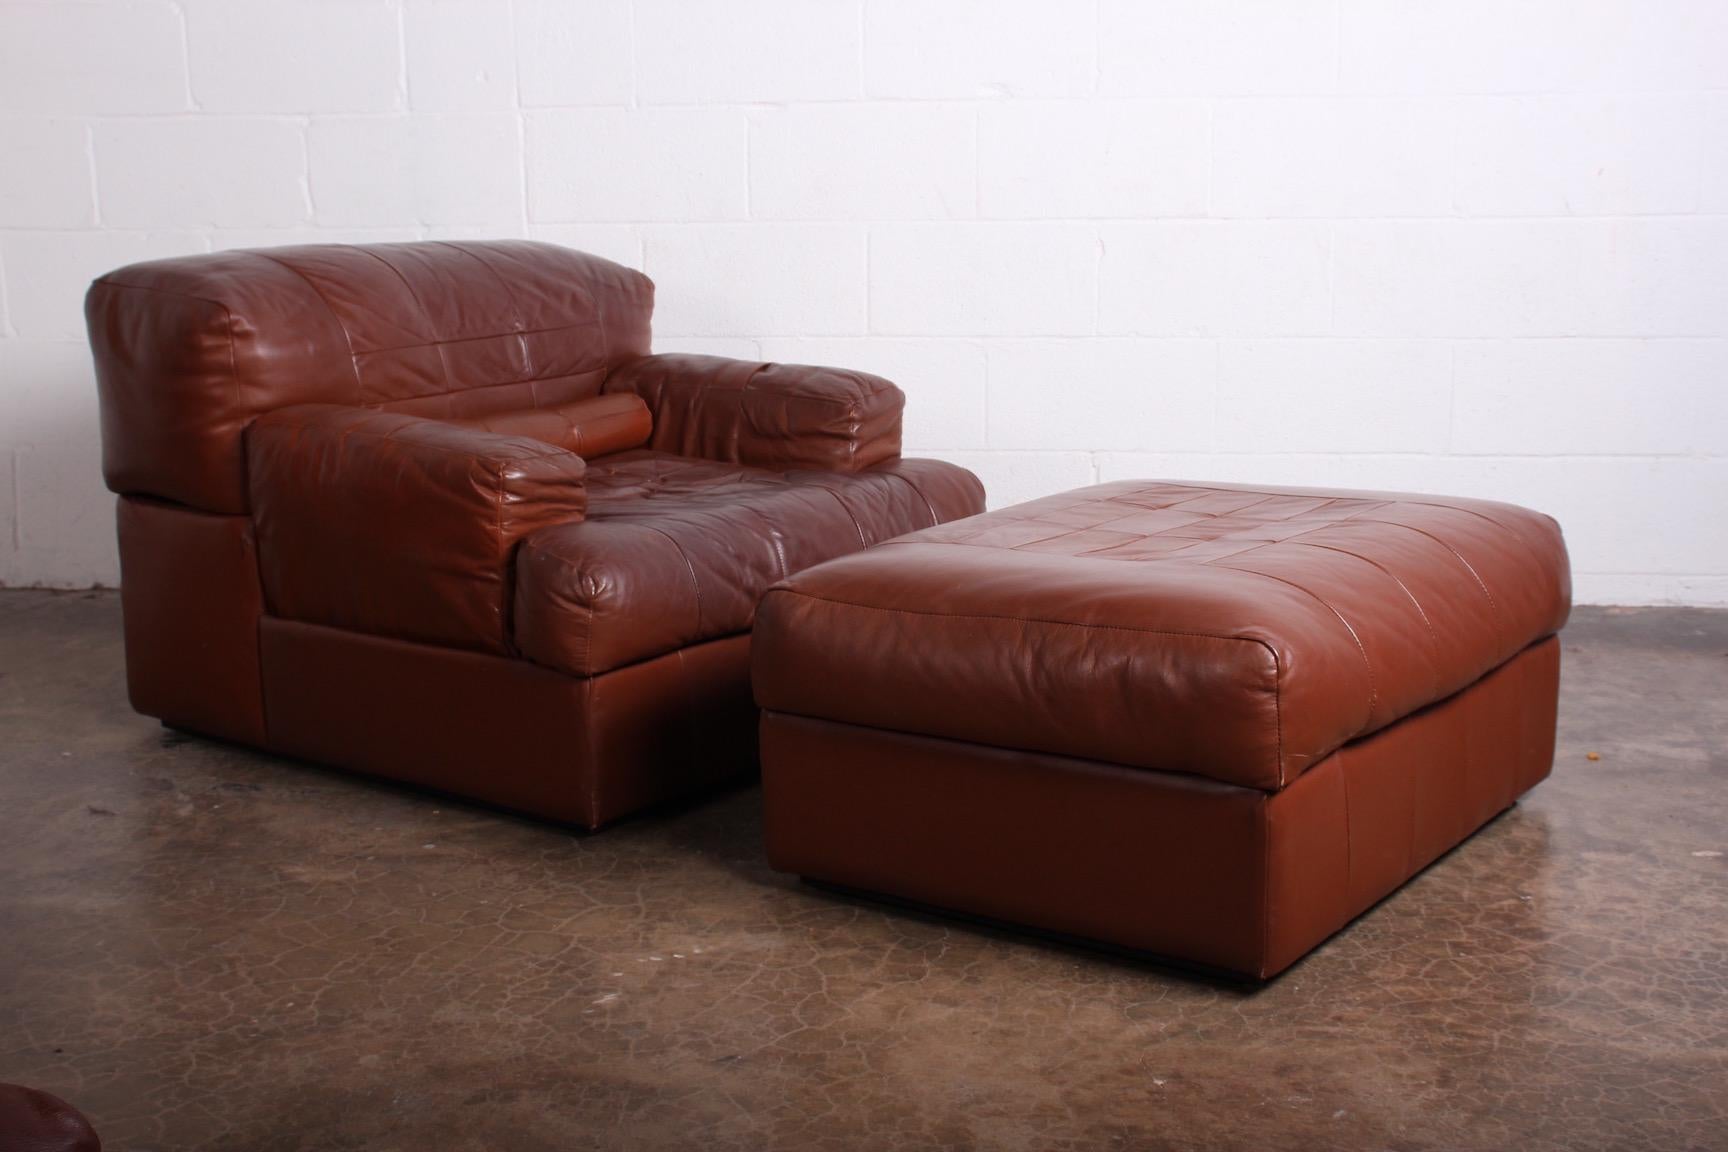 A pair of patinated leather lounge chairs and ottomans designed by Pervical Lafer.